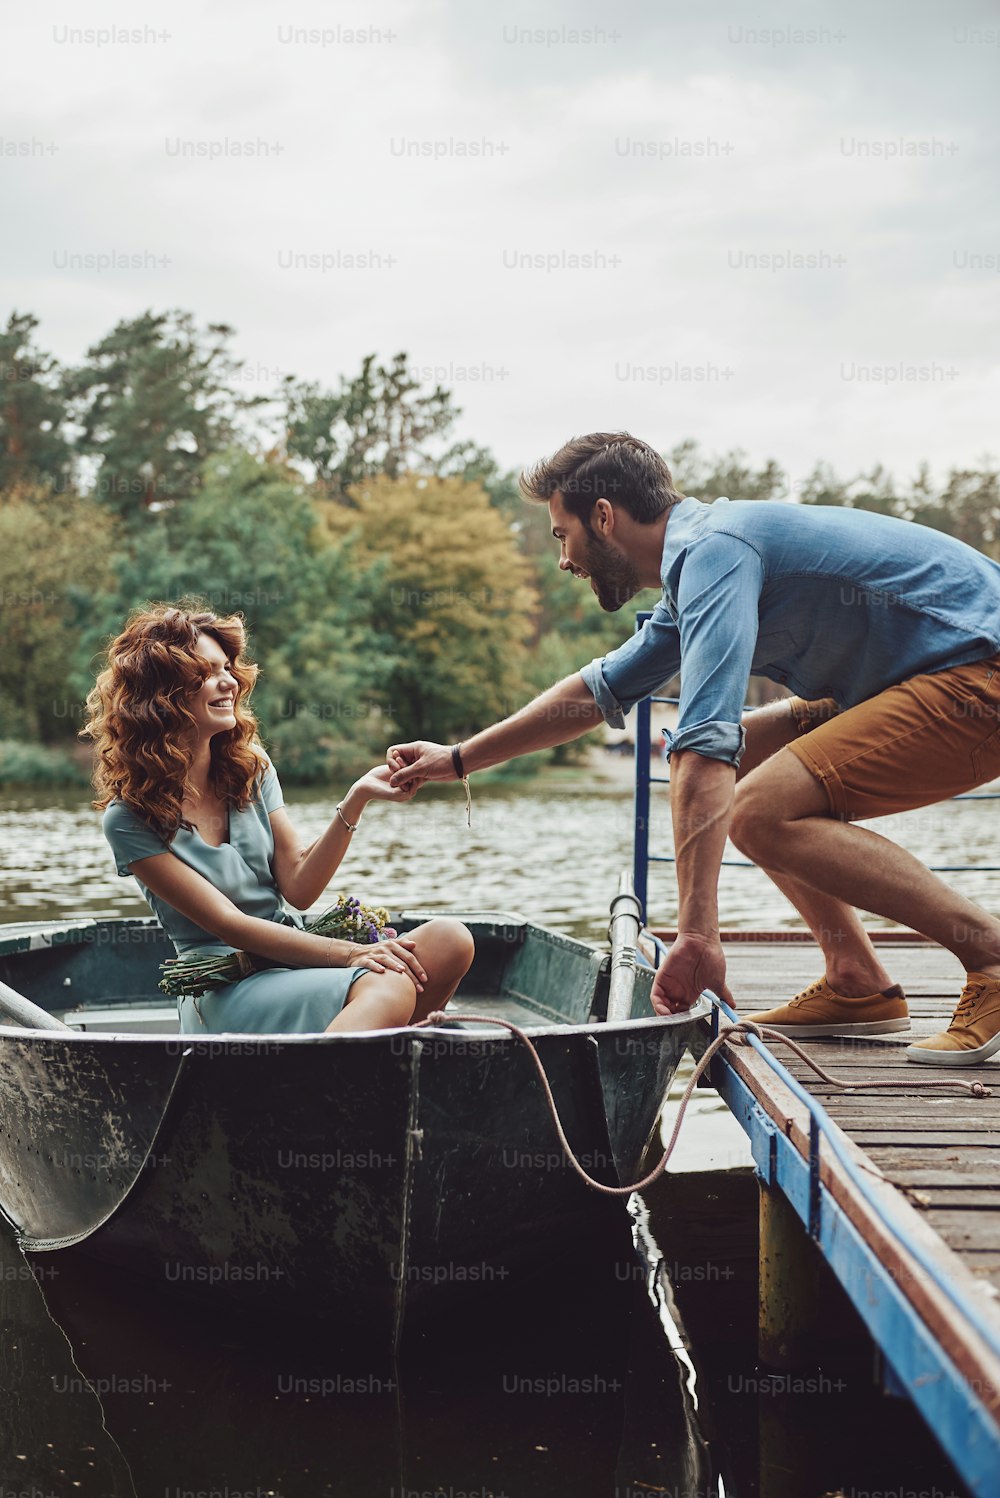 Happy young couple getting ready to row a boat while enjoying their date outdoors